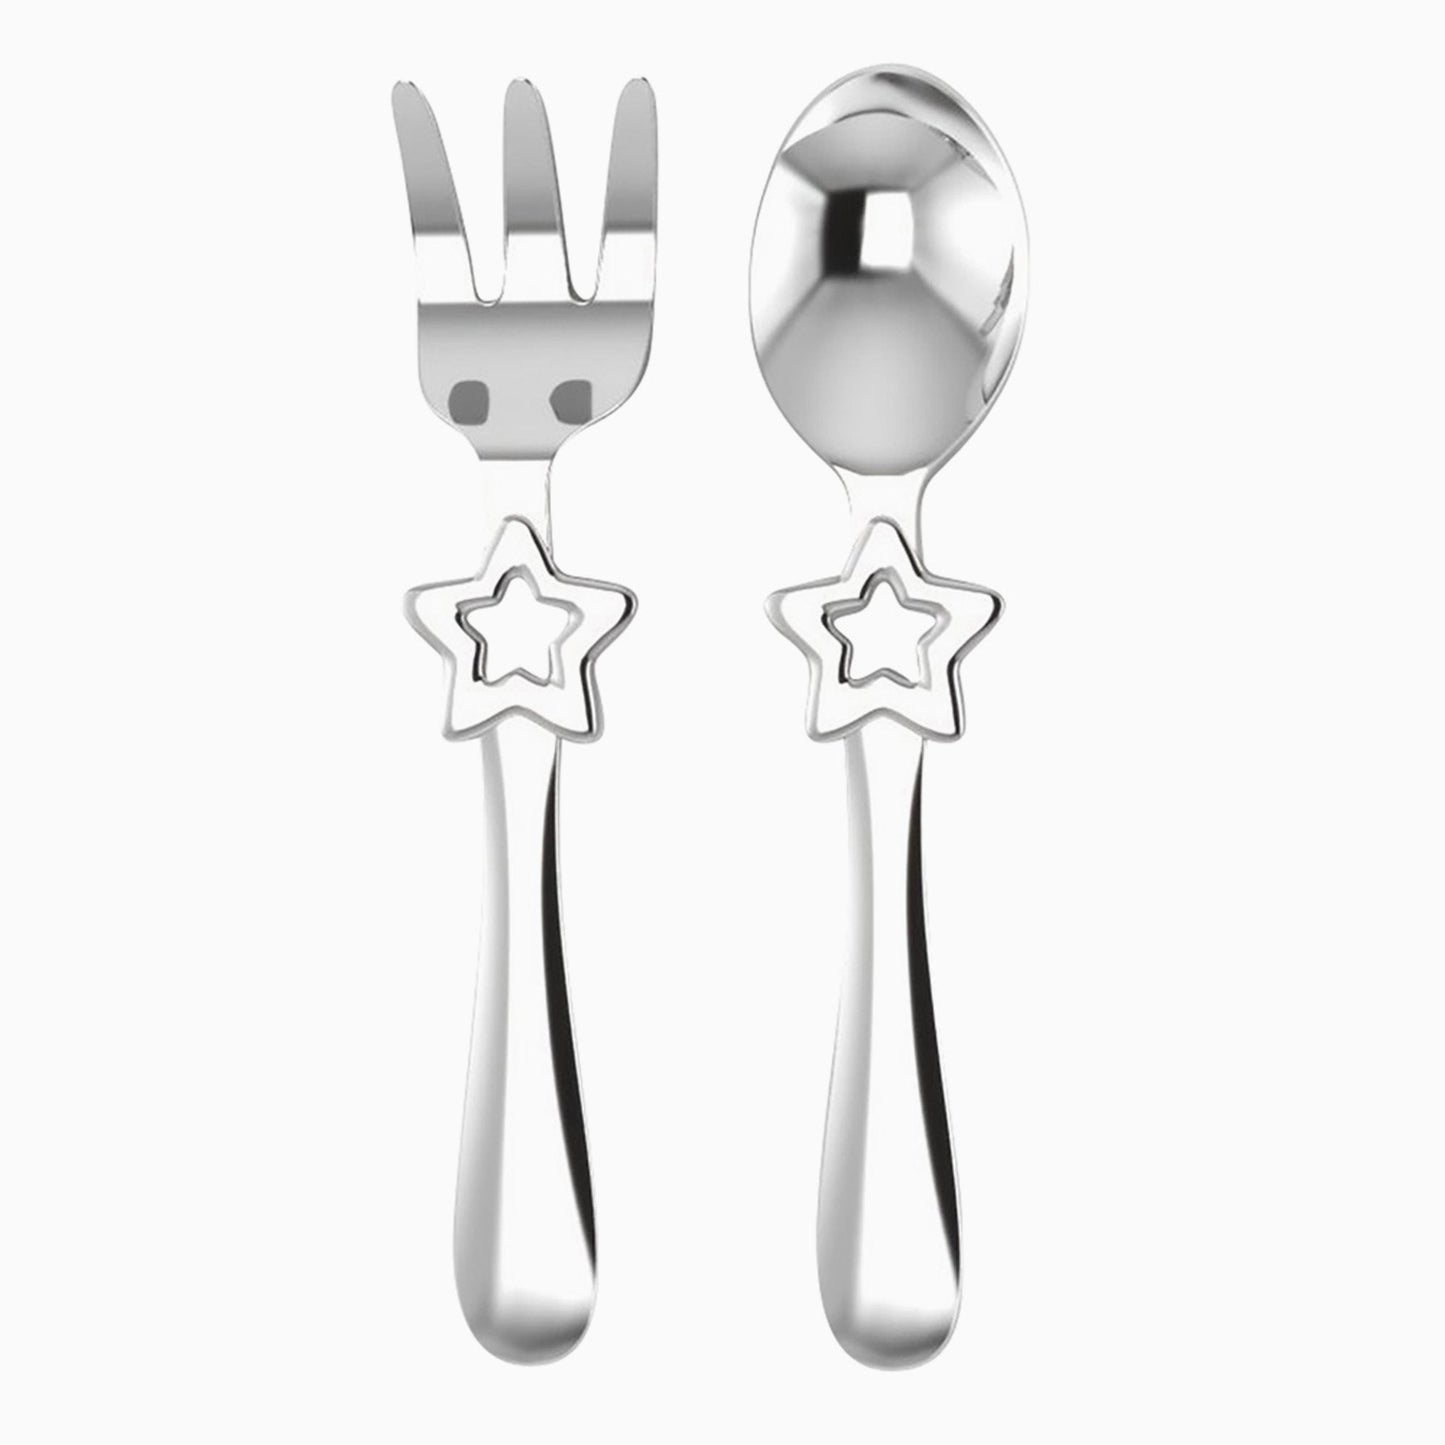 Star Silver Plated Baby Spoon and Fork Set by Krysaliis